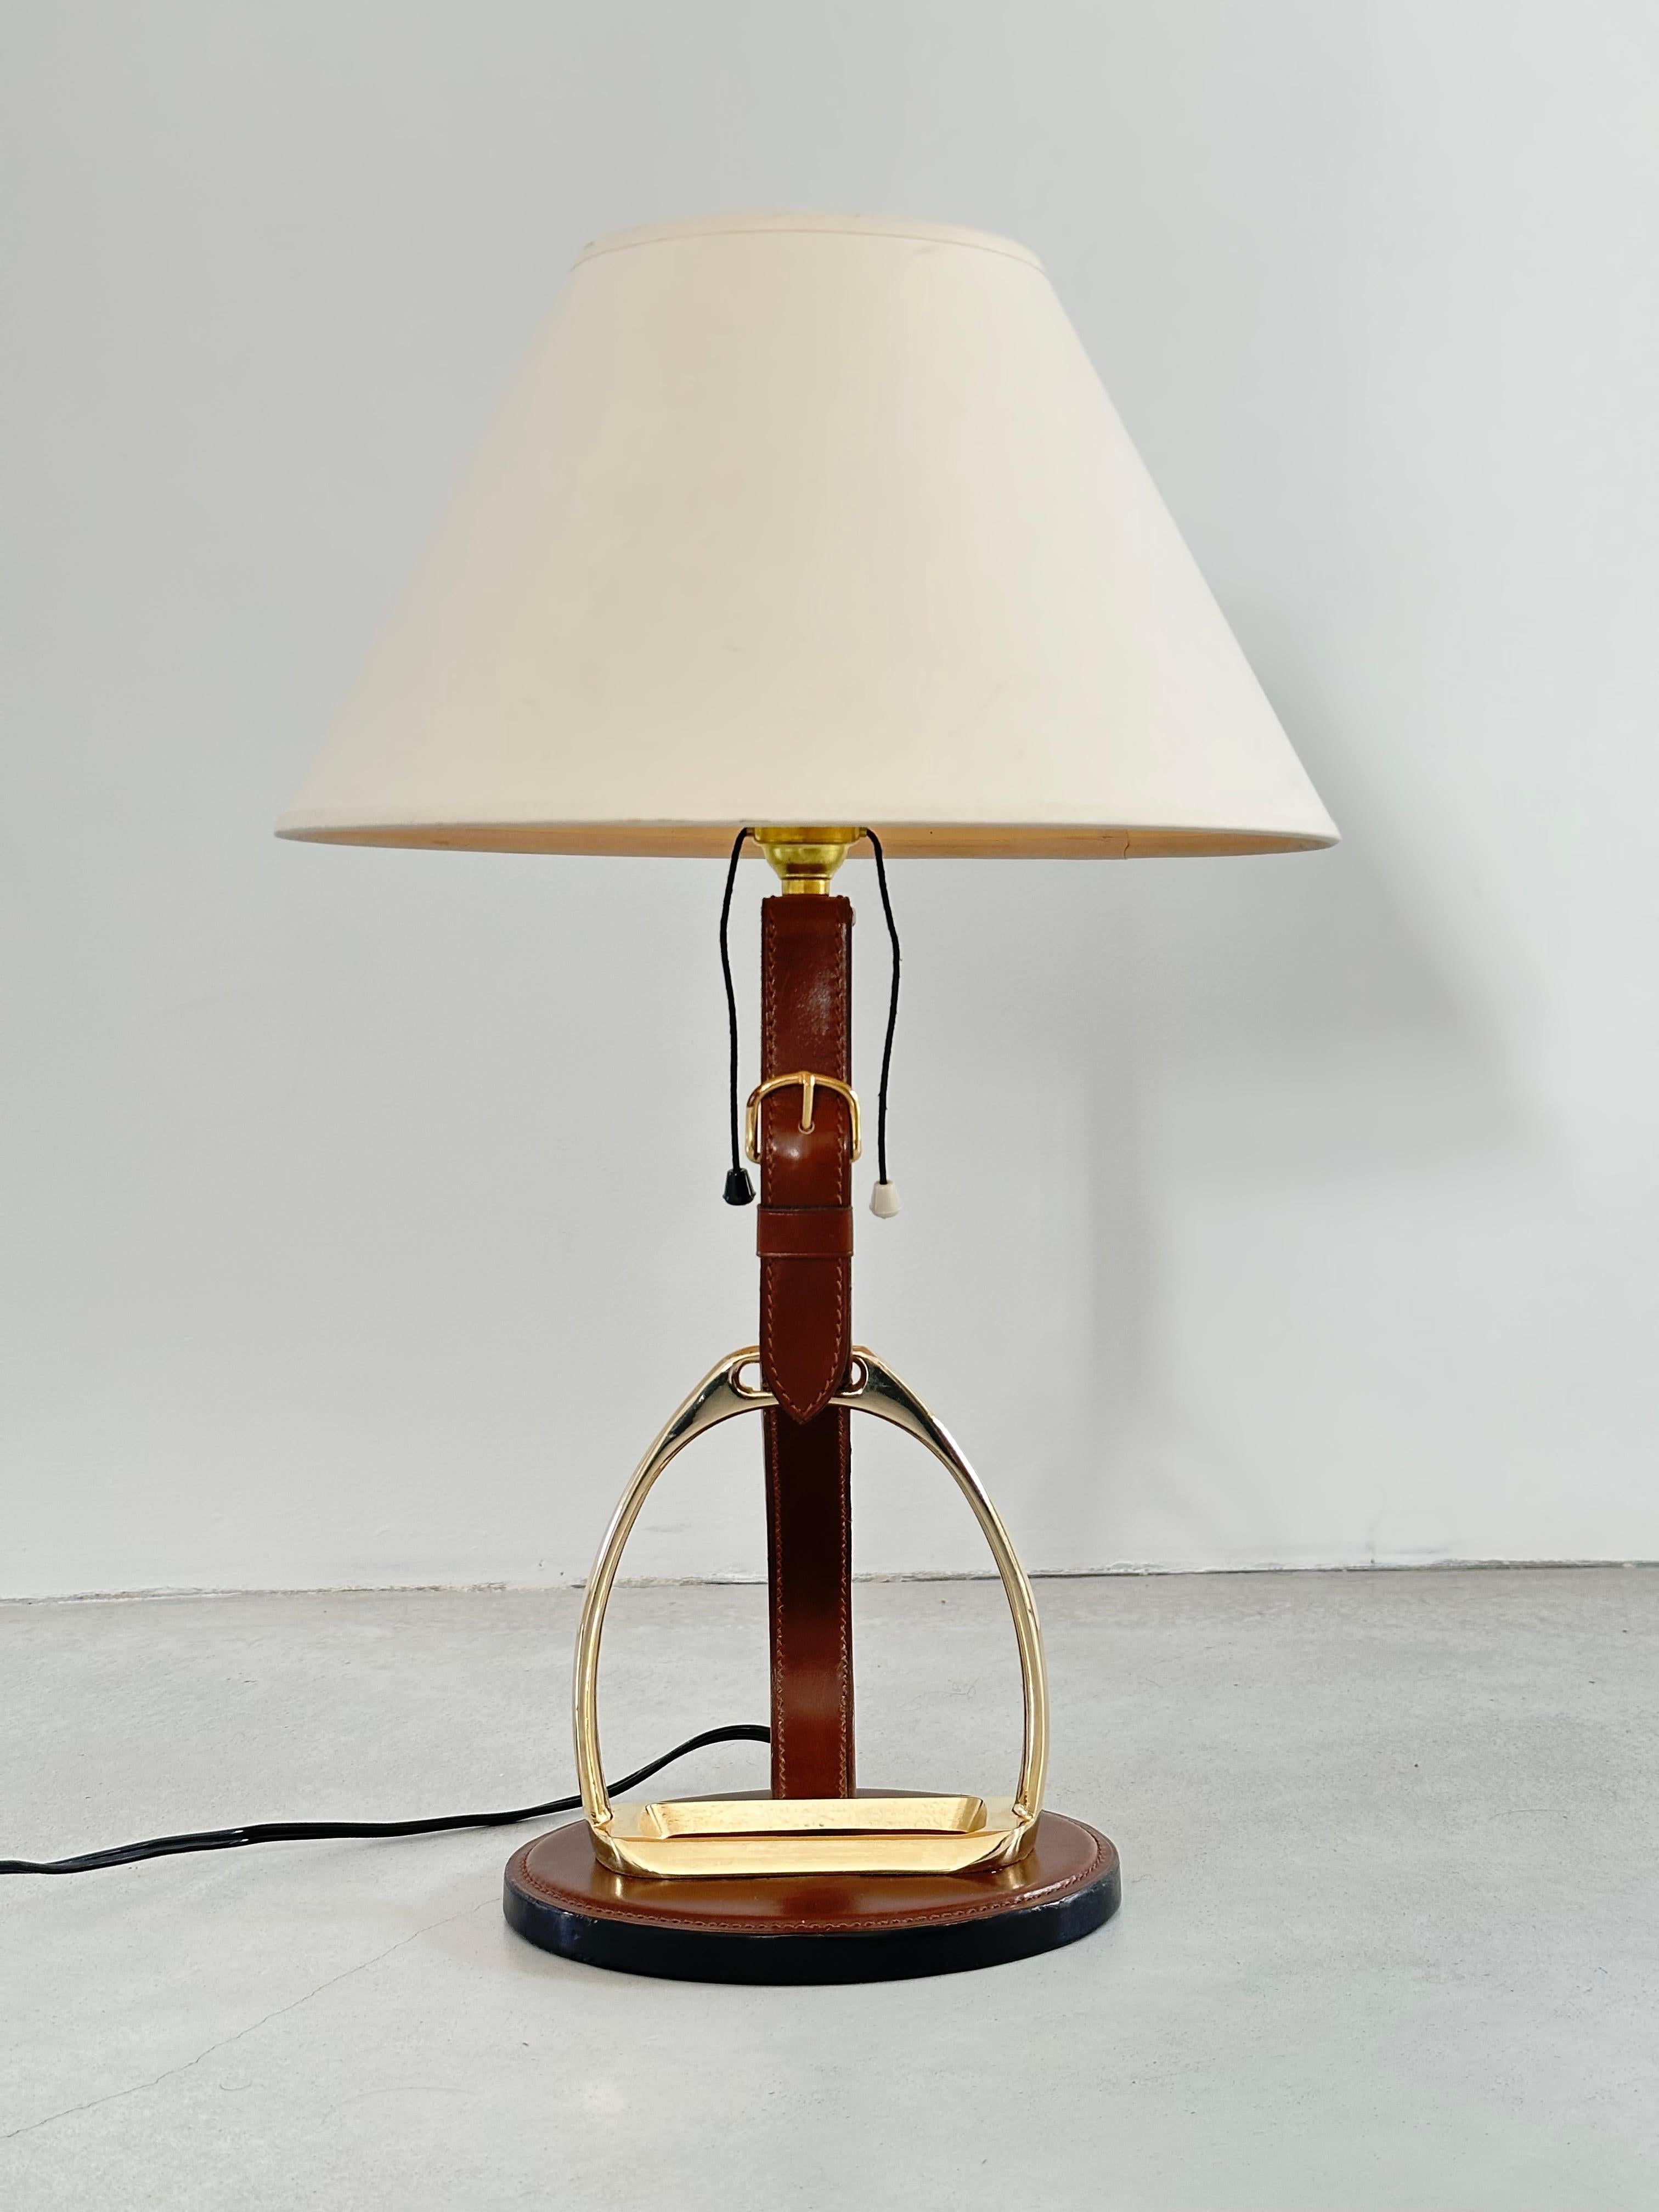 Longchamp design, French Brass & Equestrian Stitched Leather Lamp, 1960s For Sale 8